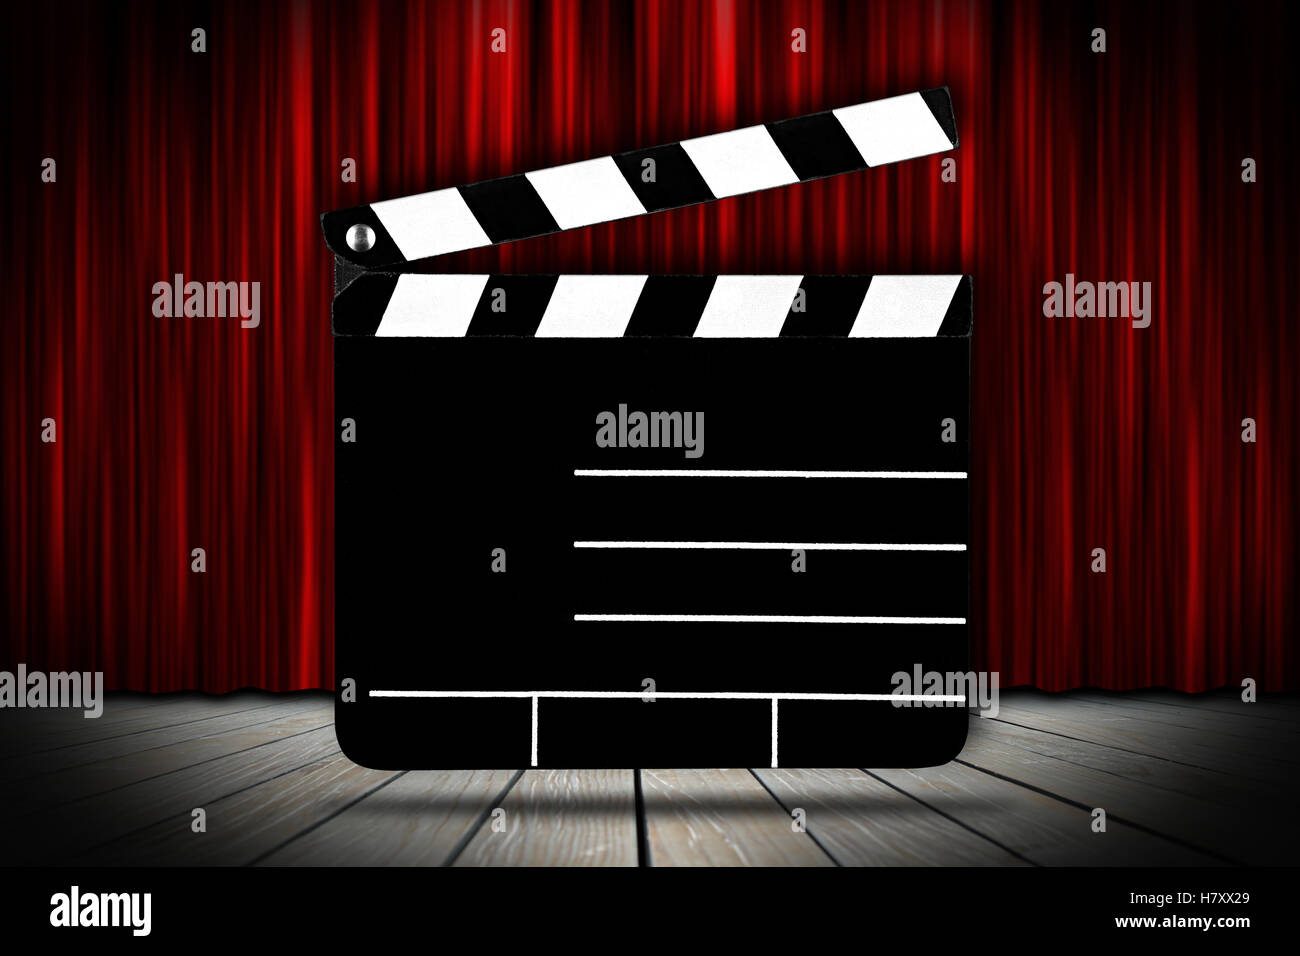 cinema voucher pattern with empty blank clapperboard slate on theater stage with red curtain Stock Photo